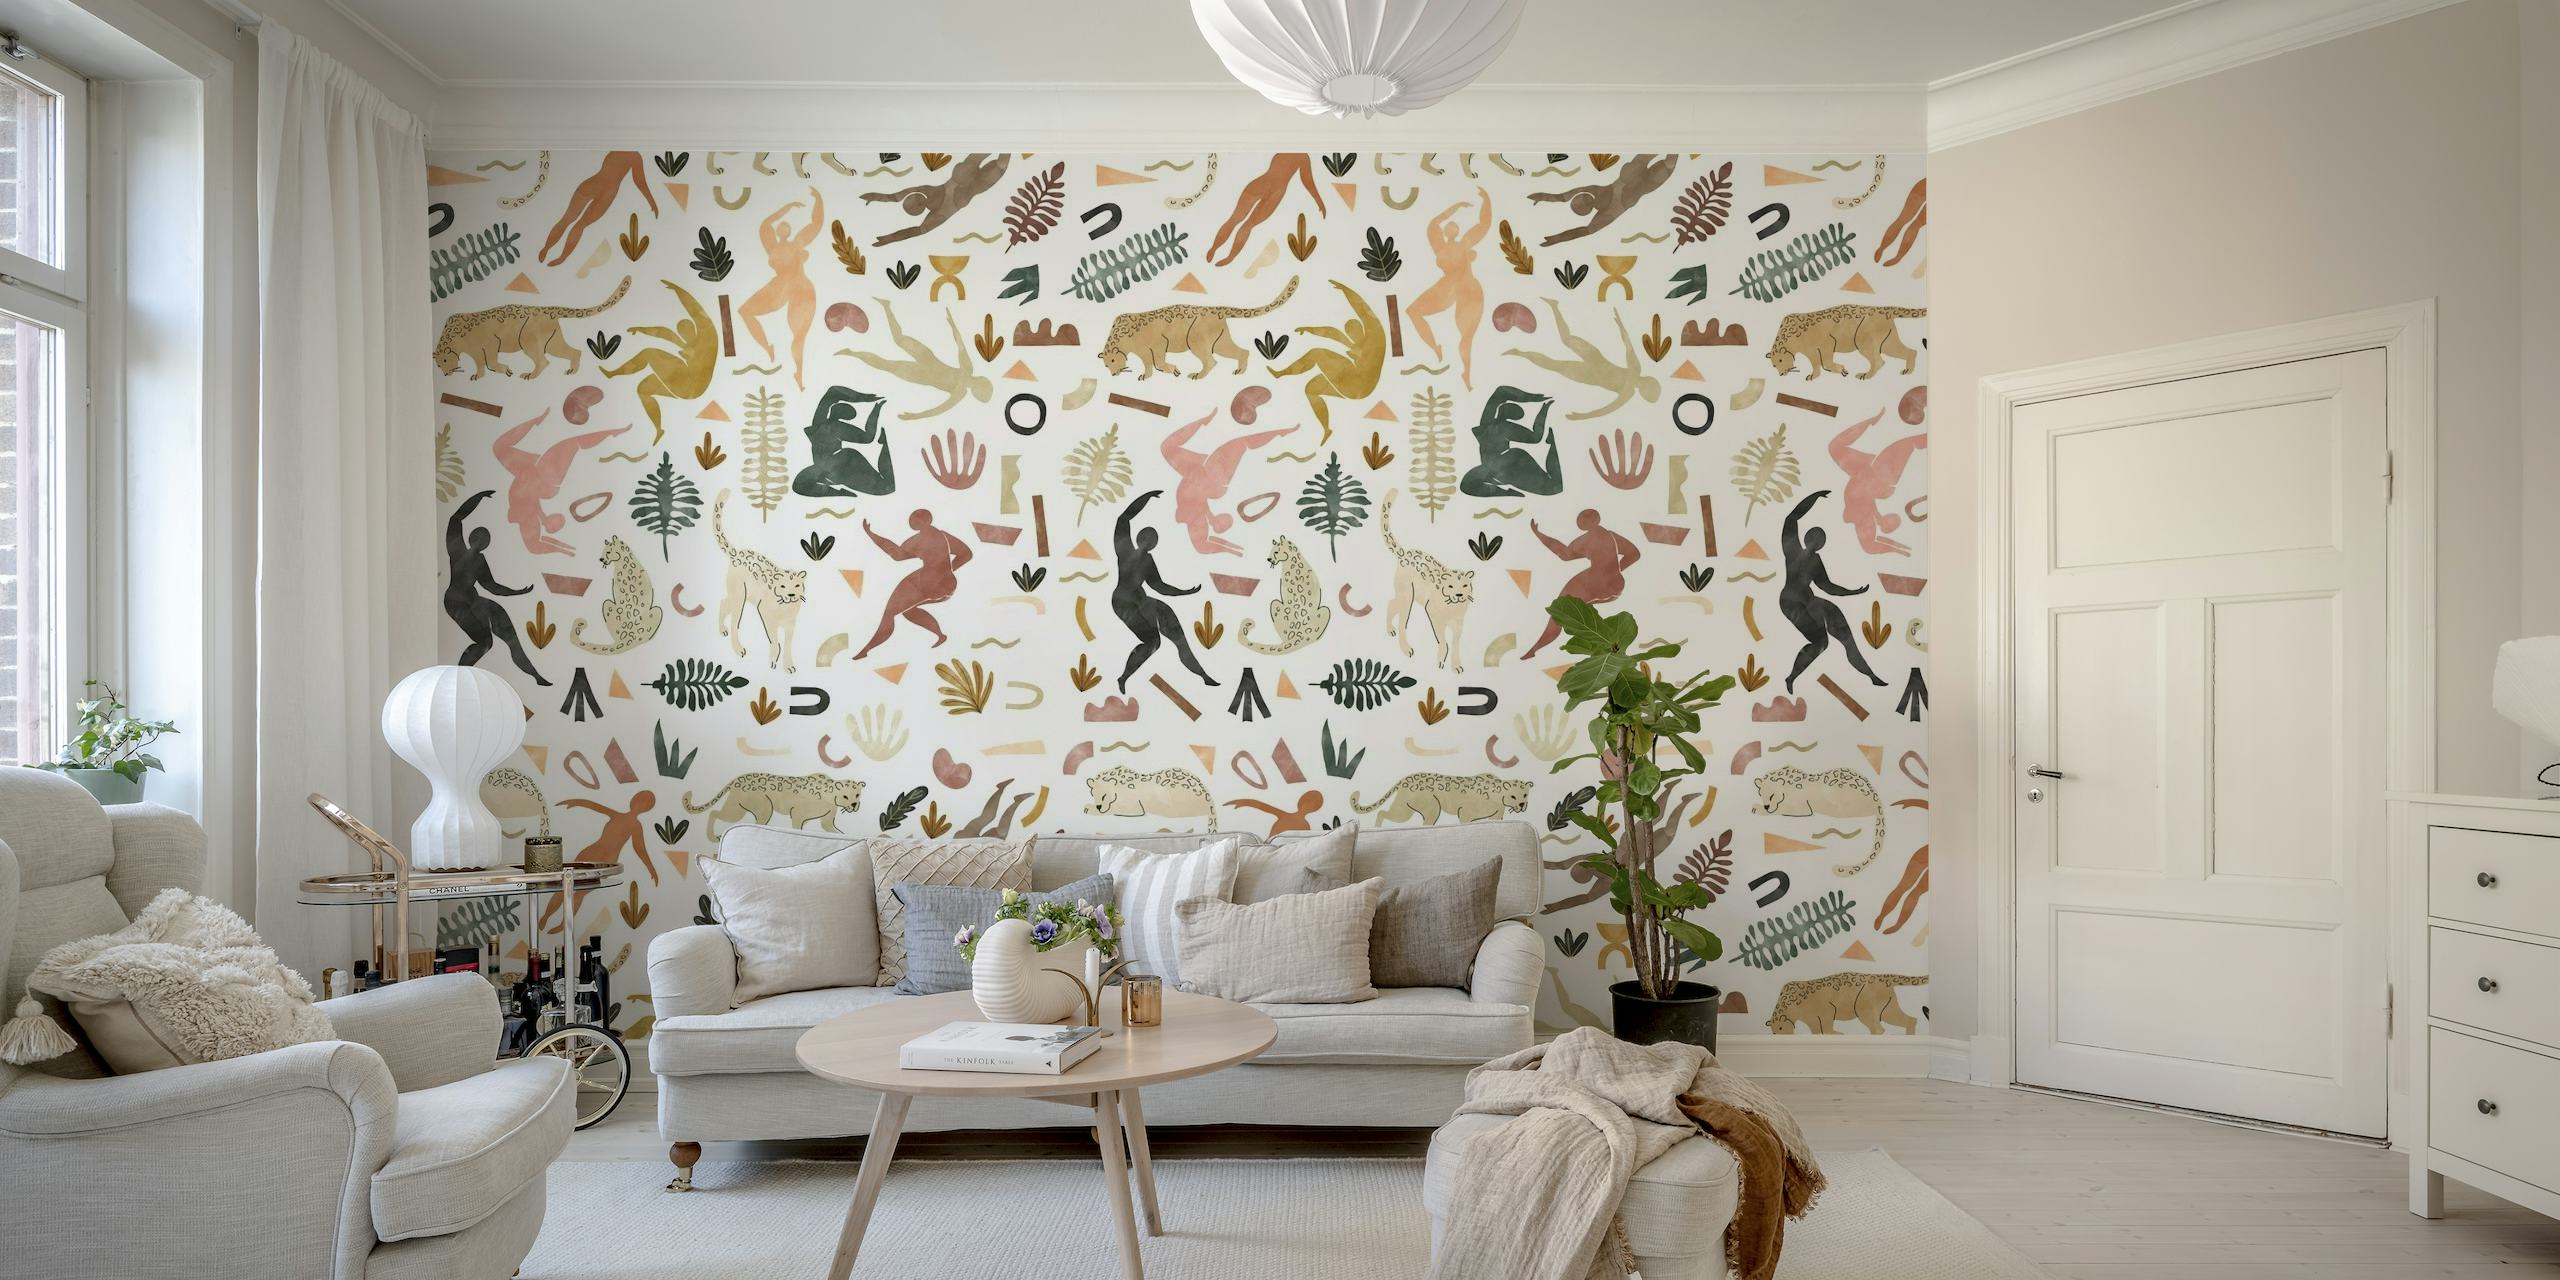 Abstract desert-themed wall mural with geometric shapes and earthy tones